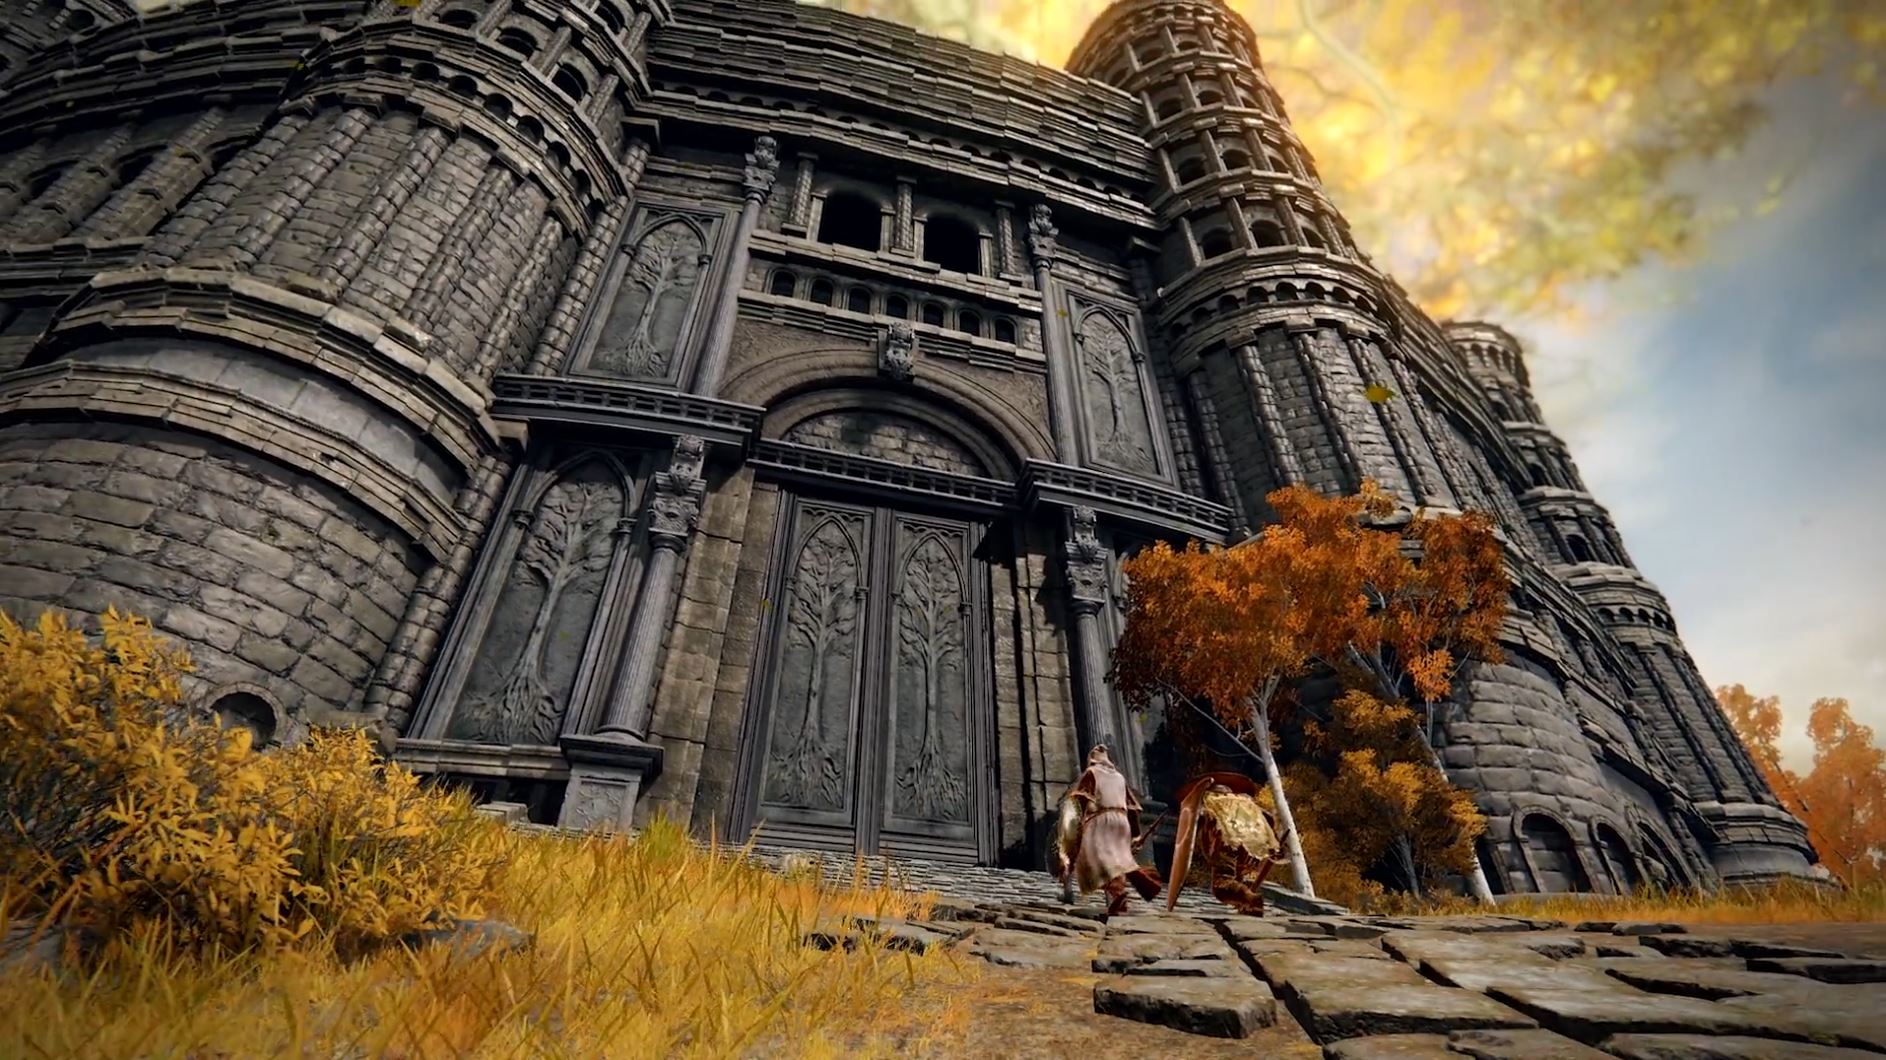 Elden Ring is getting PVP mode with free new Colosseum update